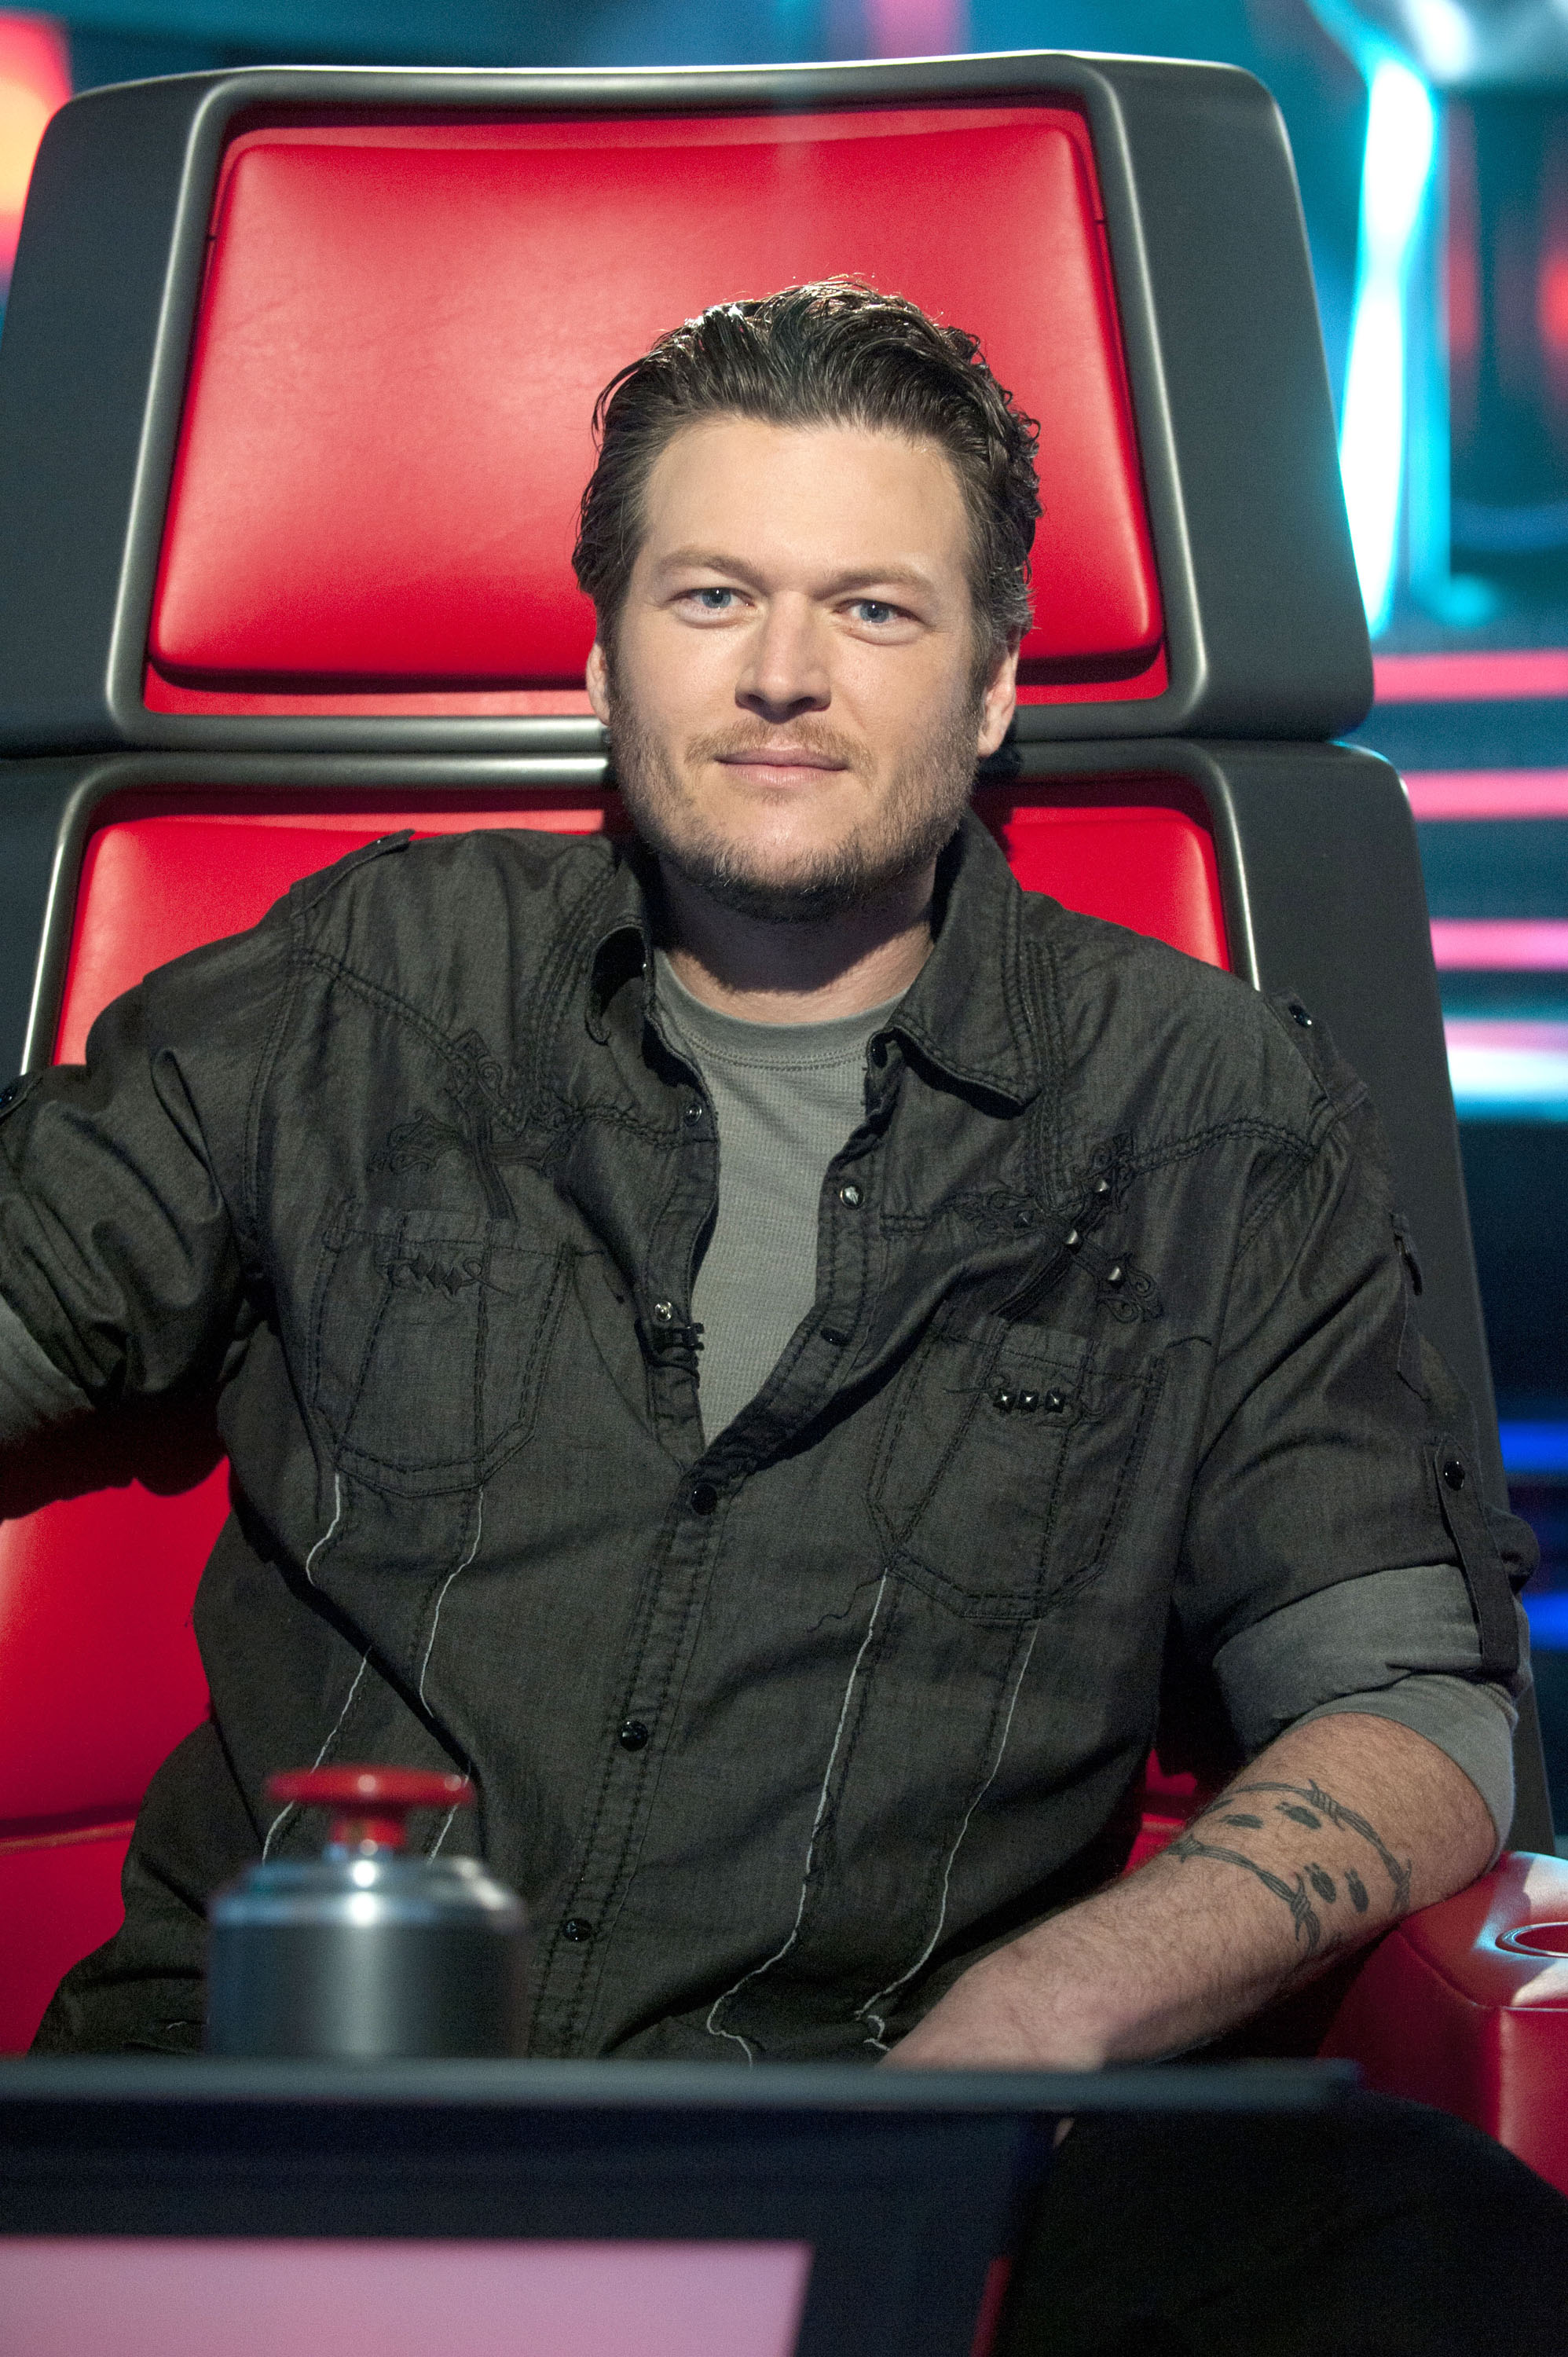 Blake Shelton and Gwen met on The Voice in 2015